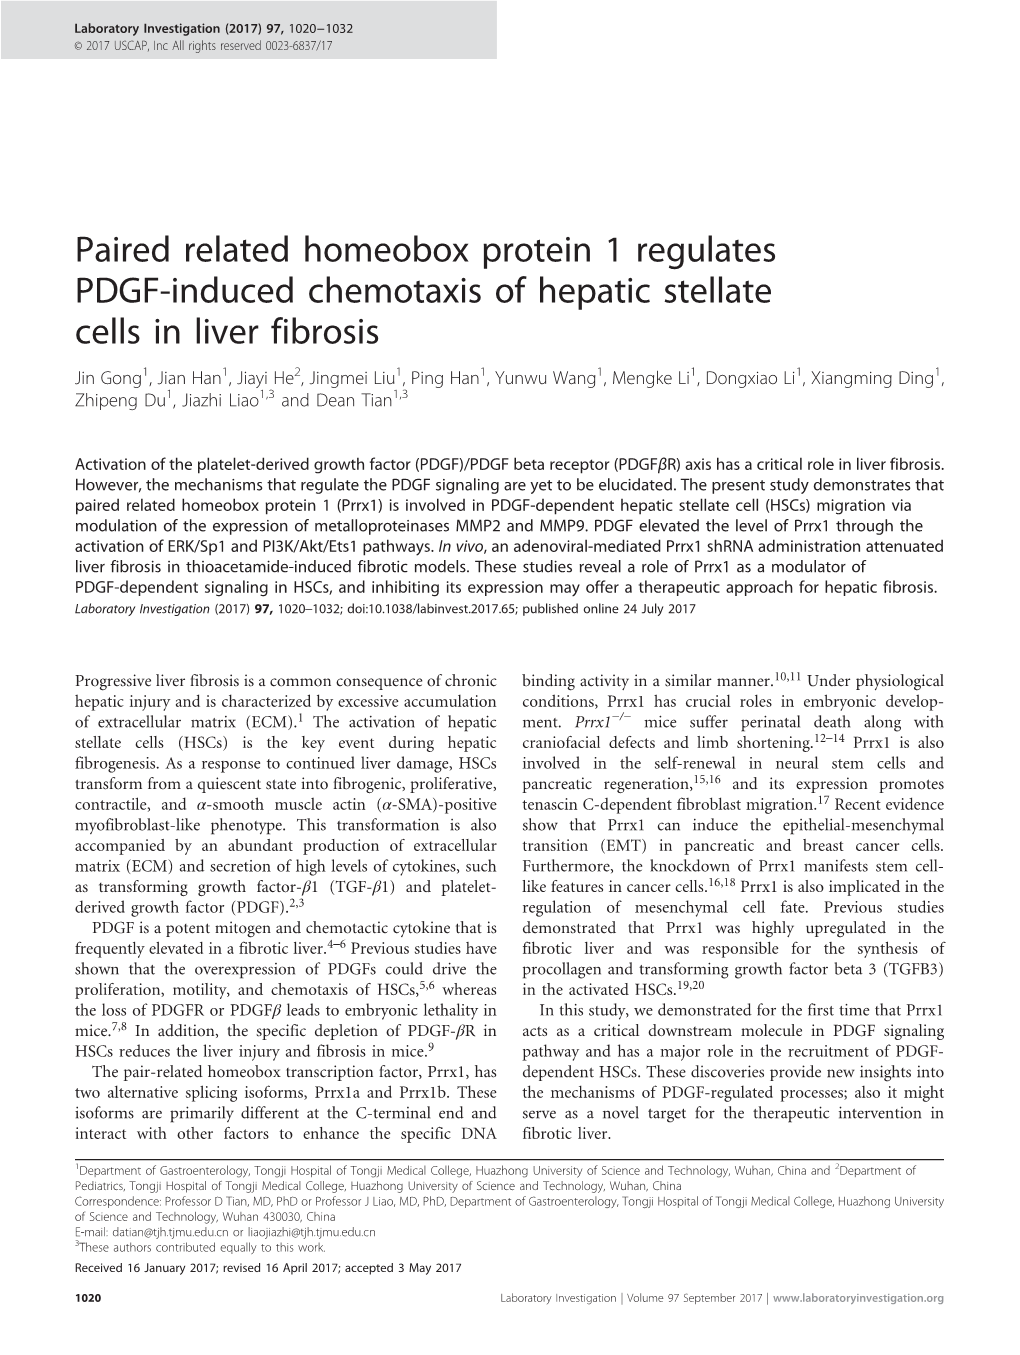 Paired Related Homeobox Protein 1 Regulates PDGF-Induced Chemotaxis of Hepatic Stellate Cells in Liver Fibrosis